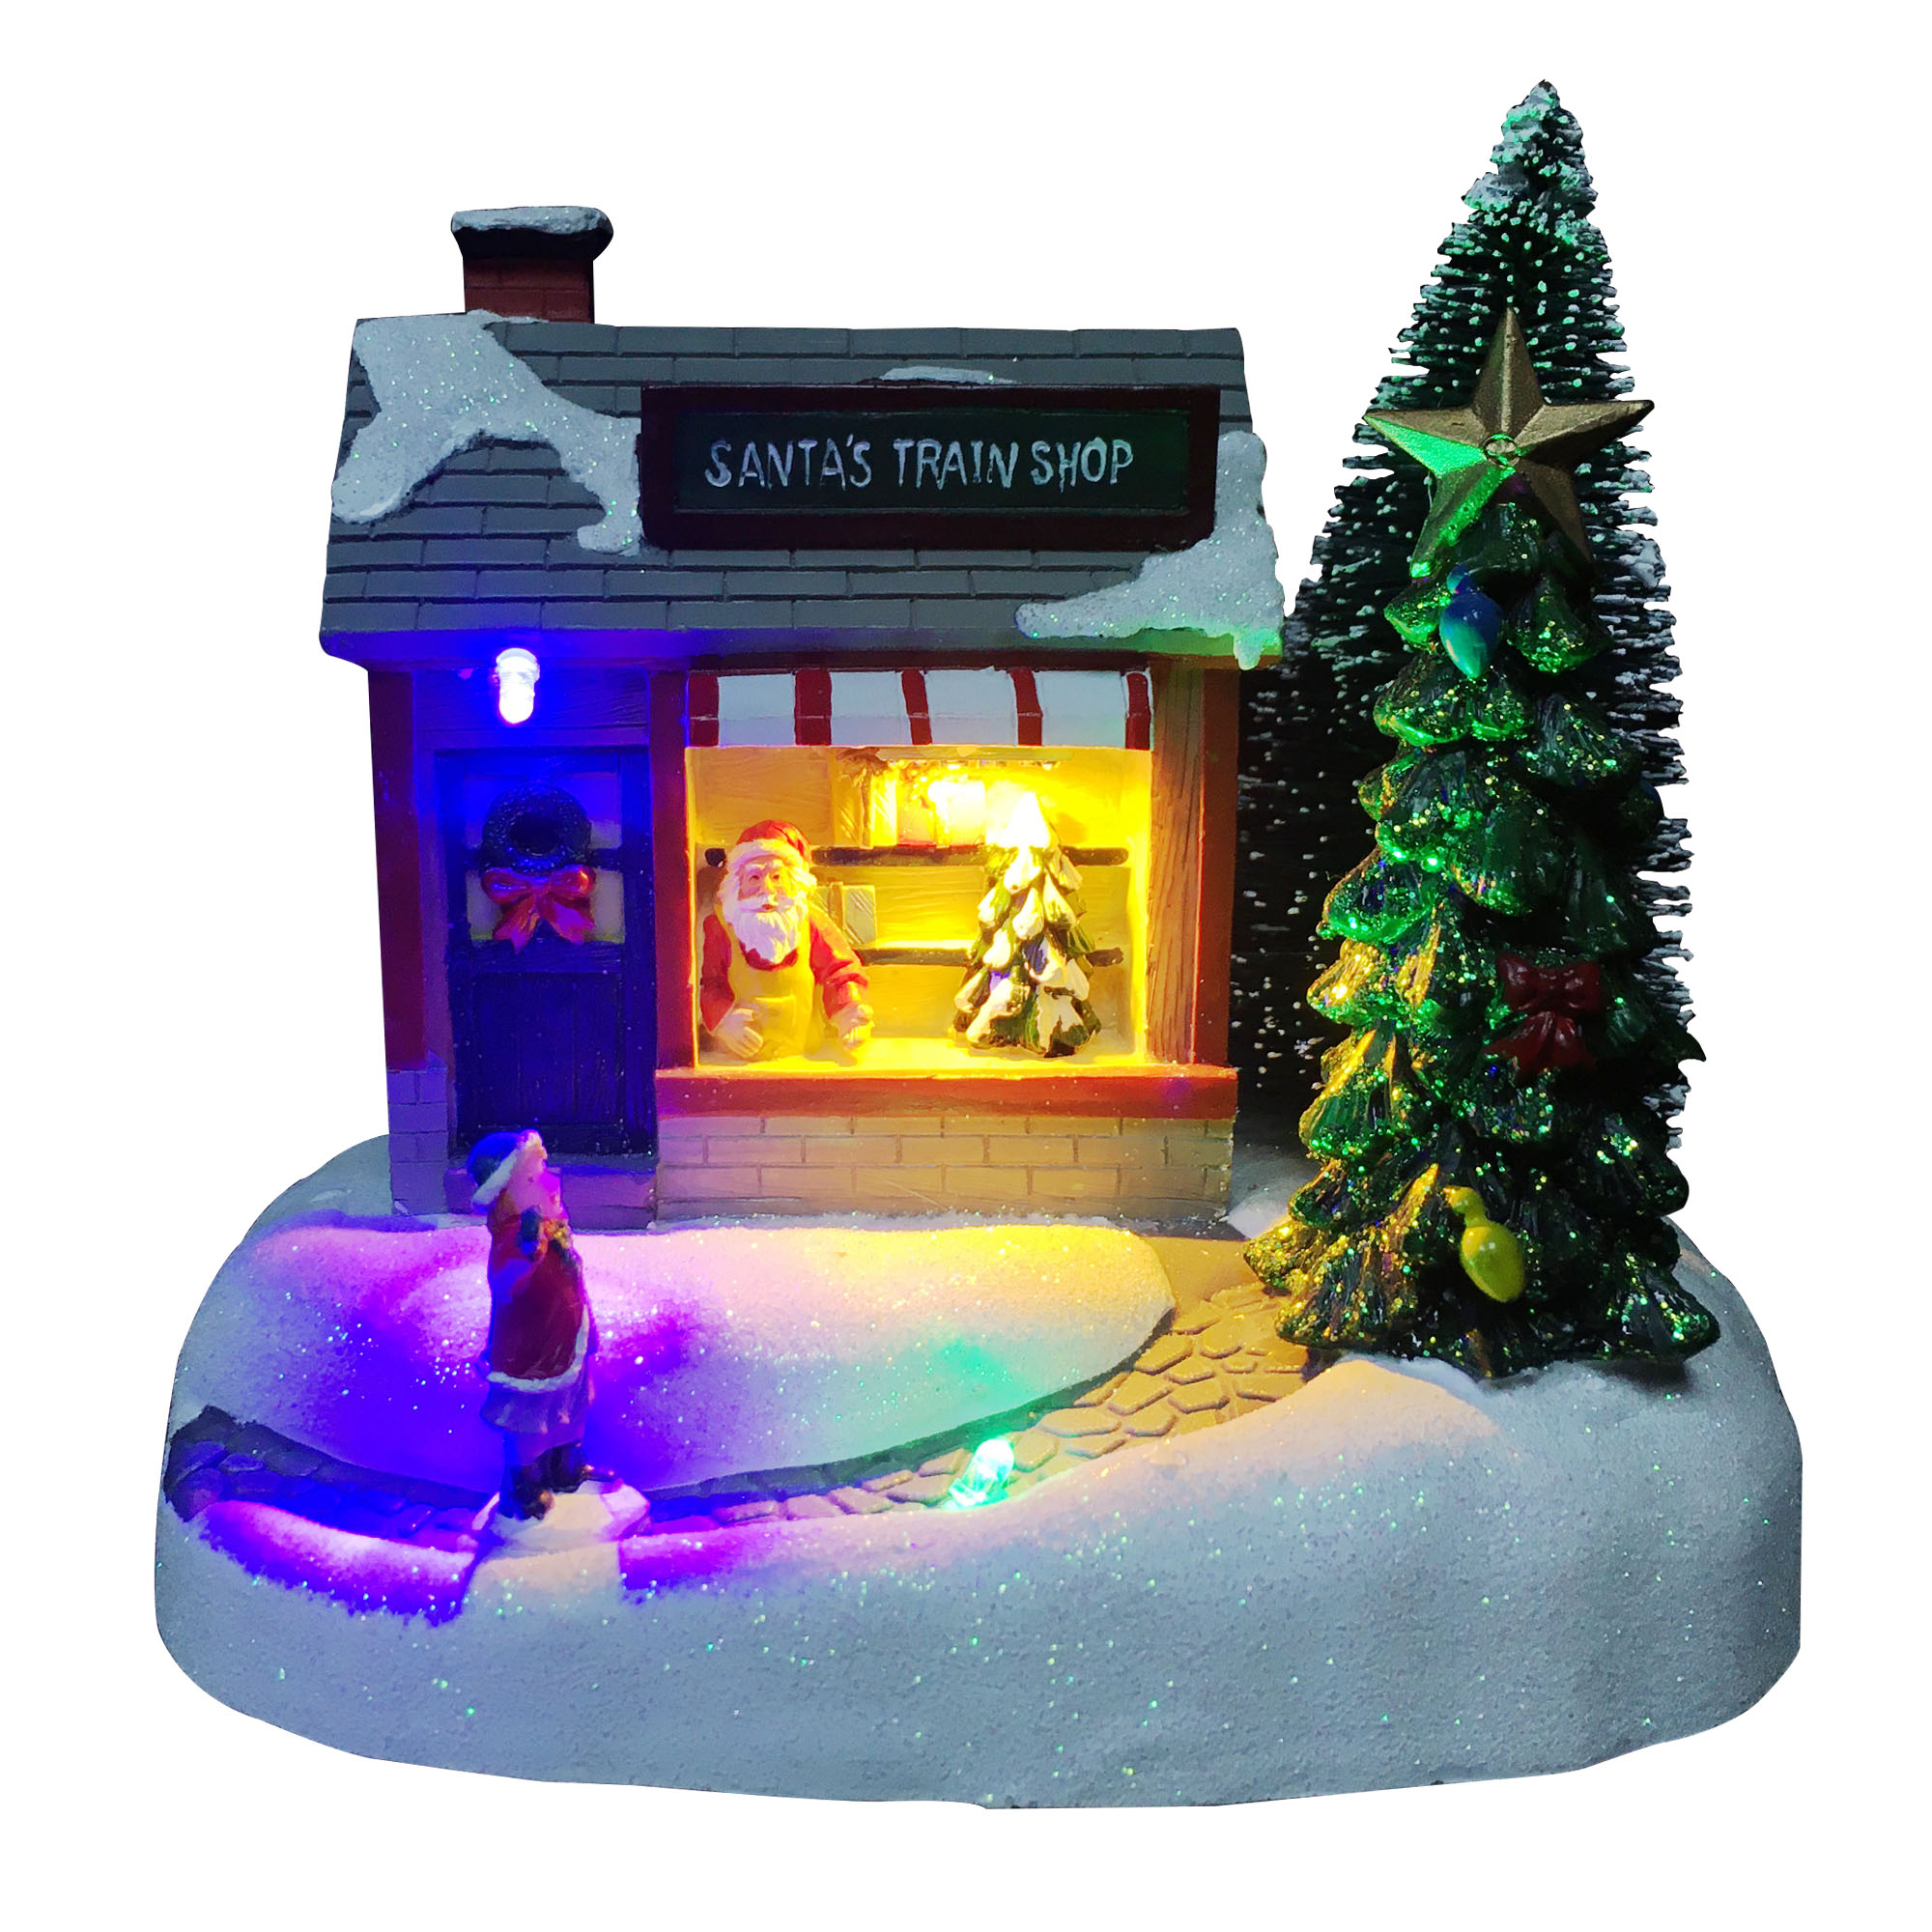 Hot New Products Light Up Christmas Village Set - Melody colorful Xmas village Christmas Decoration Santa’s Train Shop scene led lighted Christmas house – Melody